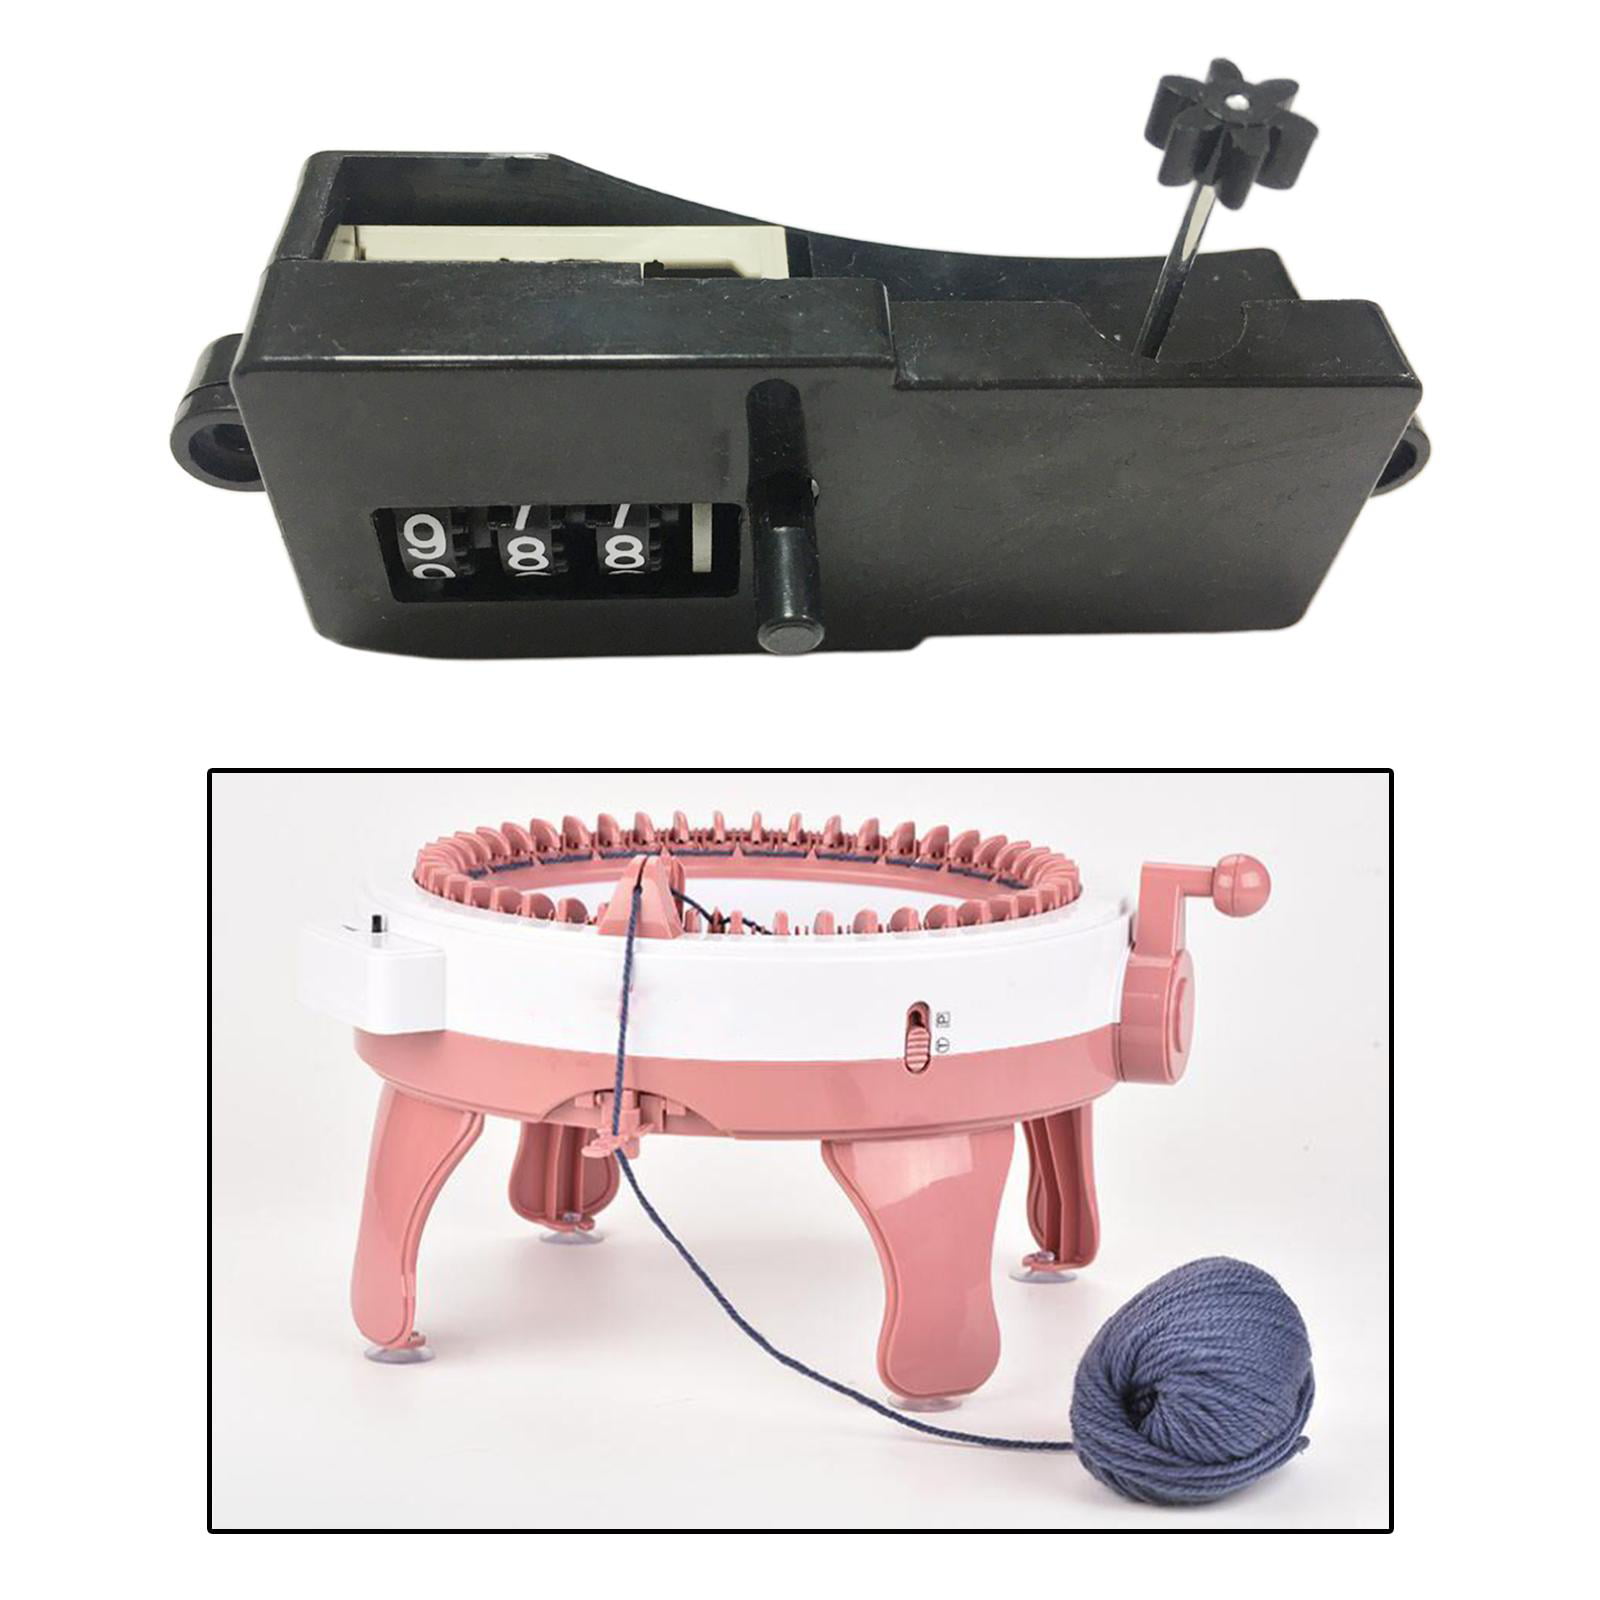 Generic Row Crocheting Counter Knitting Machine Knit Counter For Sweater